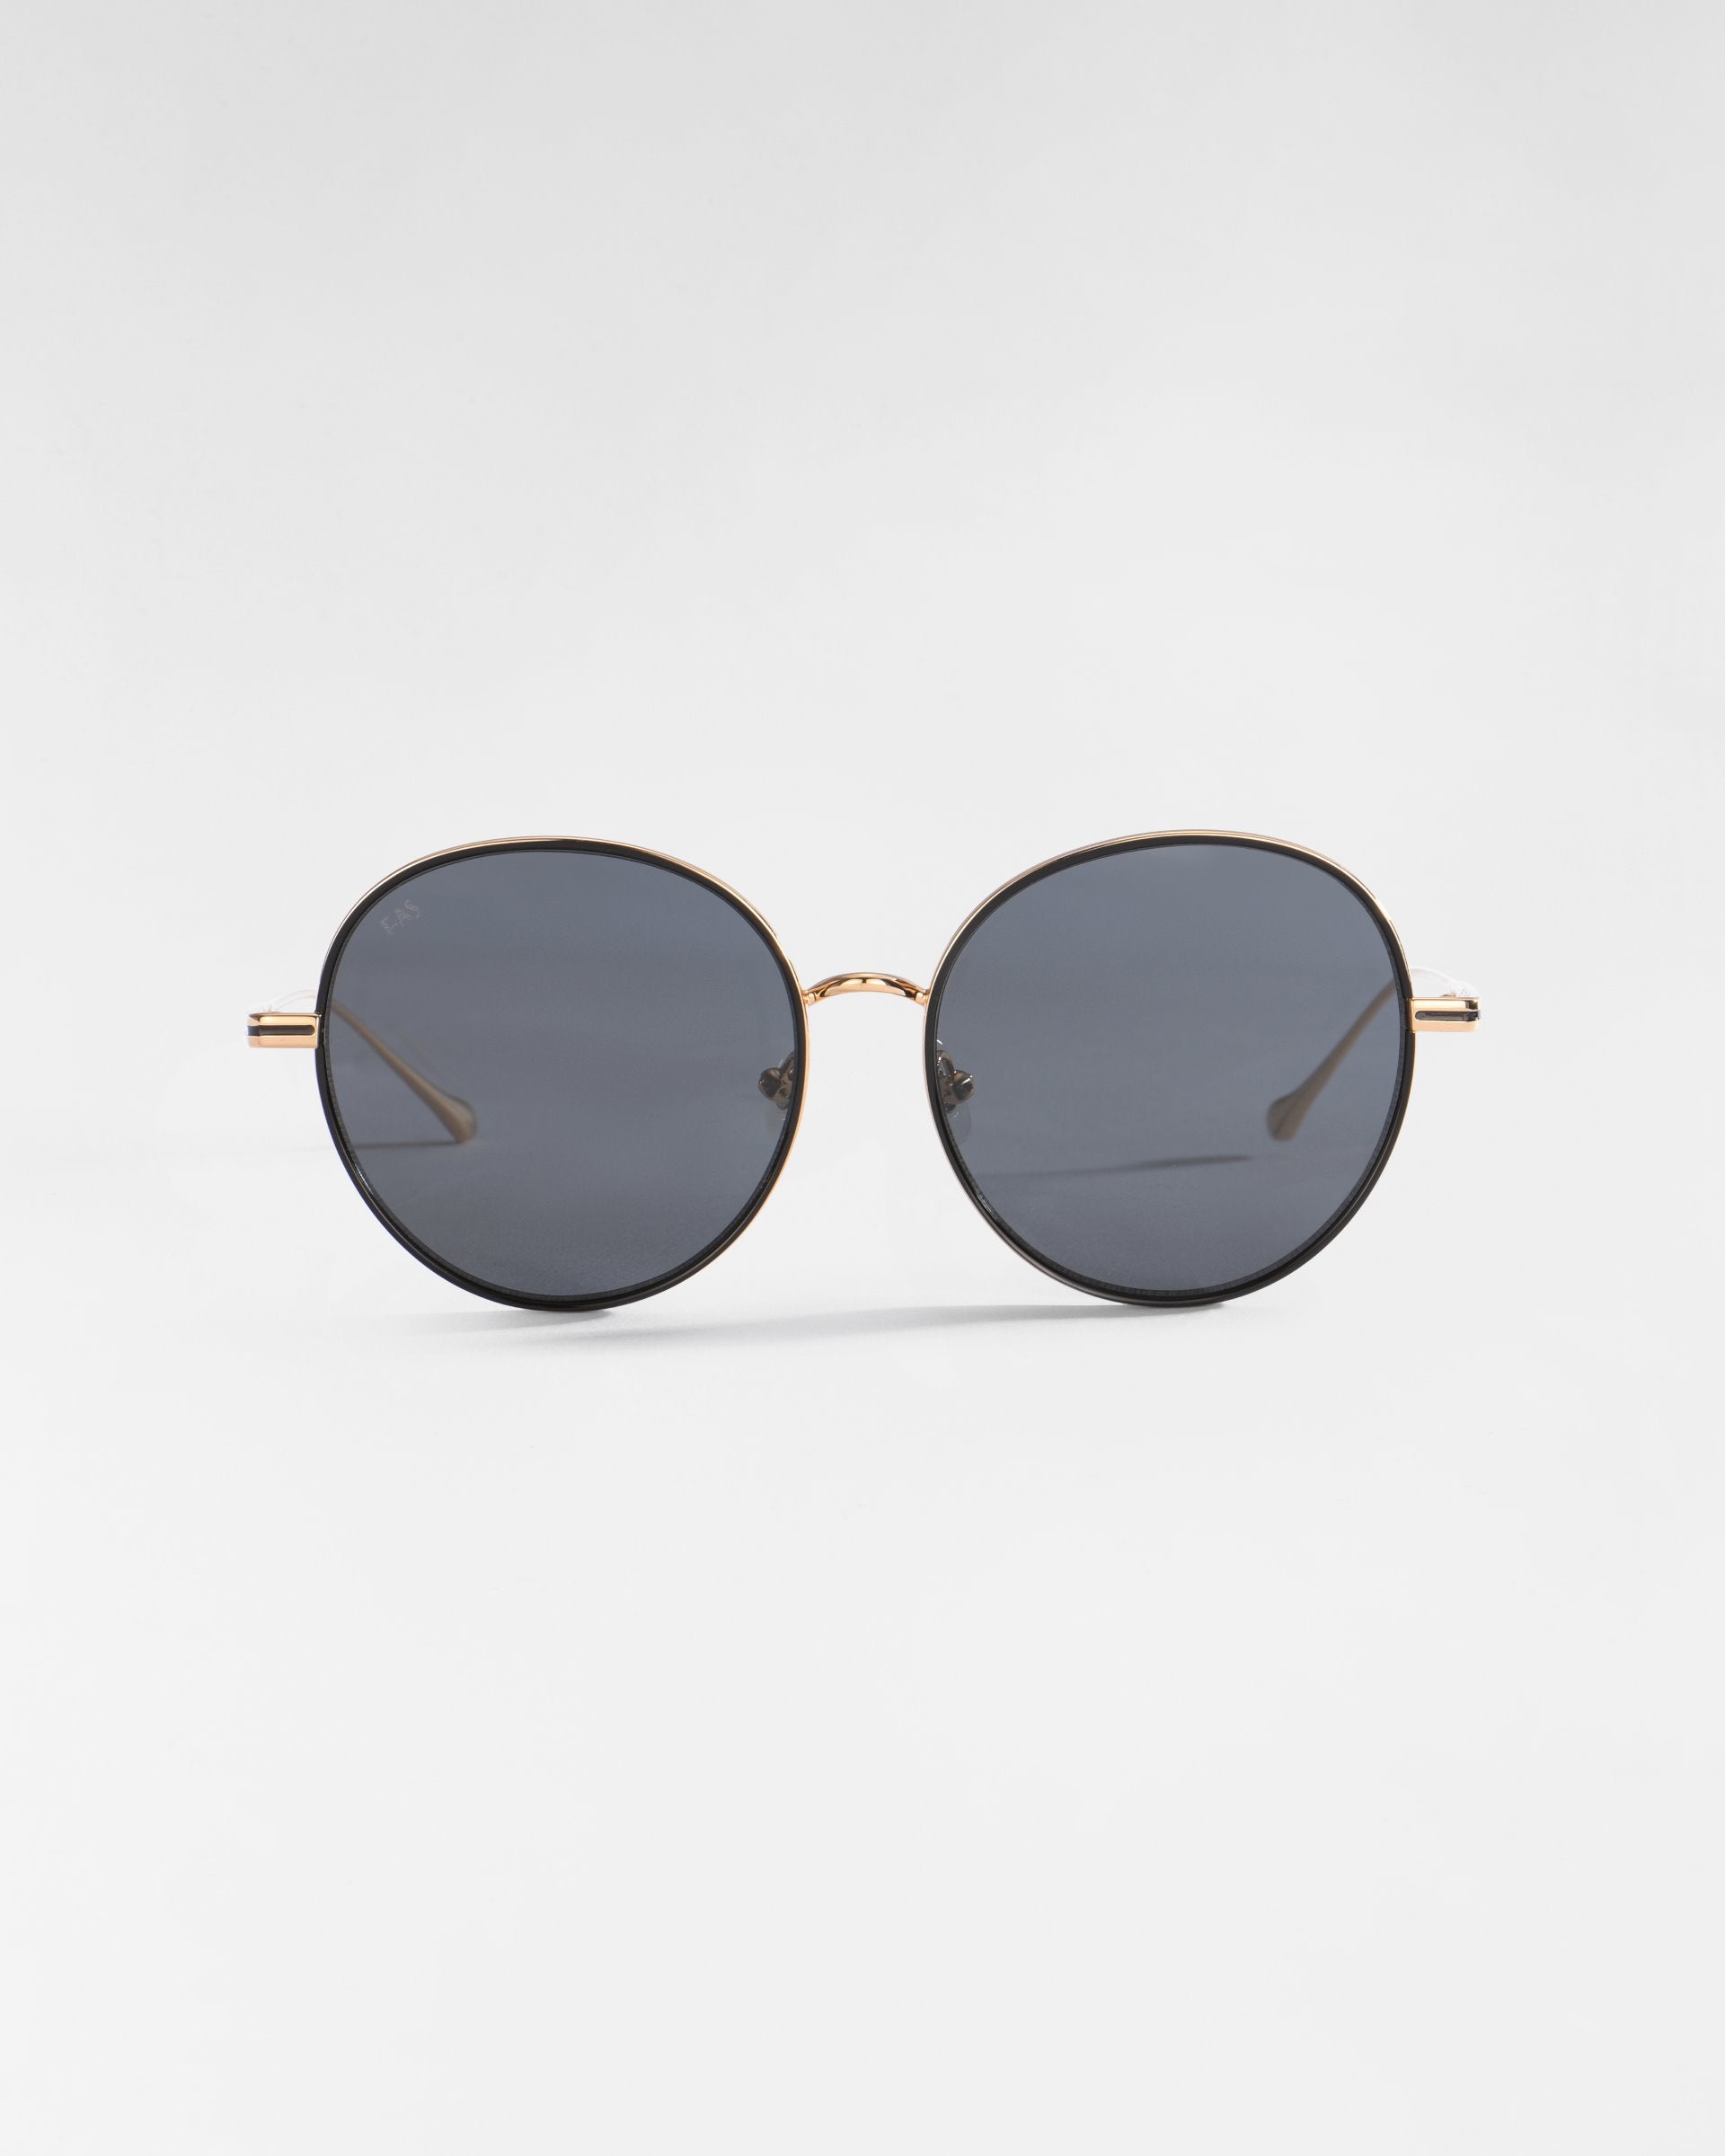 A pair of round sunglasses with thin 18-karat gold plated frames and dark grey lenses, adorned with jadestone nose pads, positioned against a plain white background. Product Name: Lemon, Brand Name: For Art&#39;s Sake®.